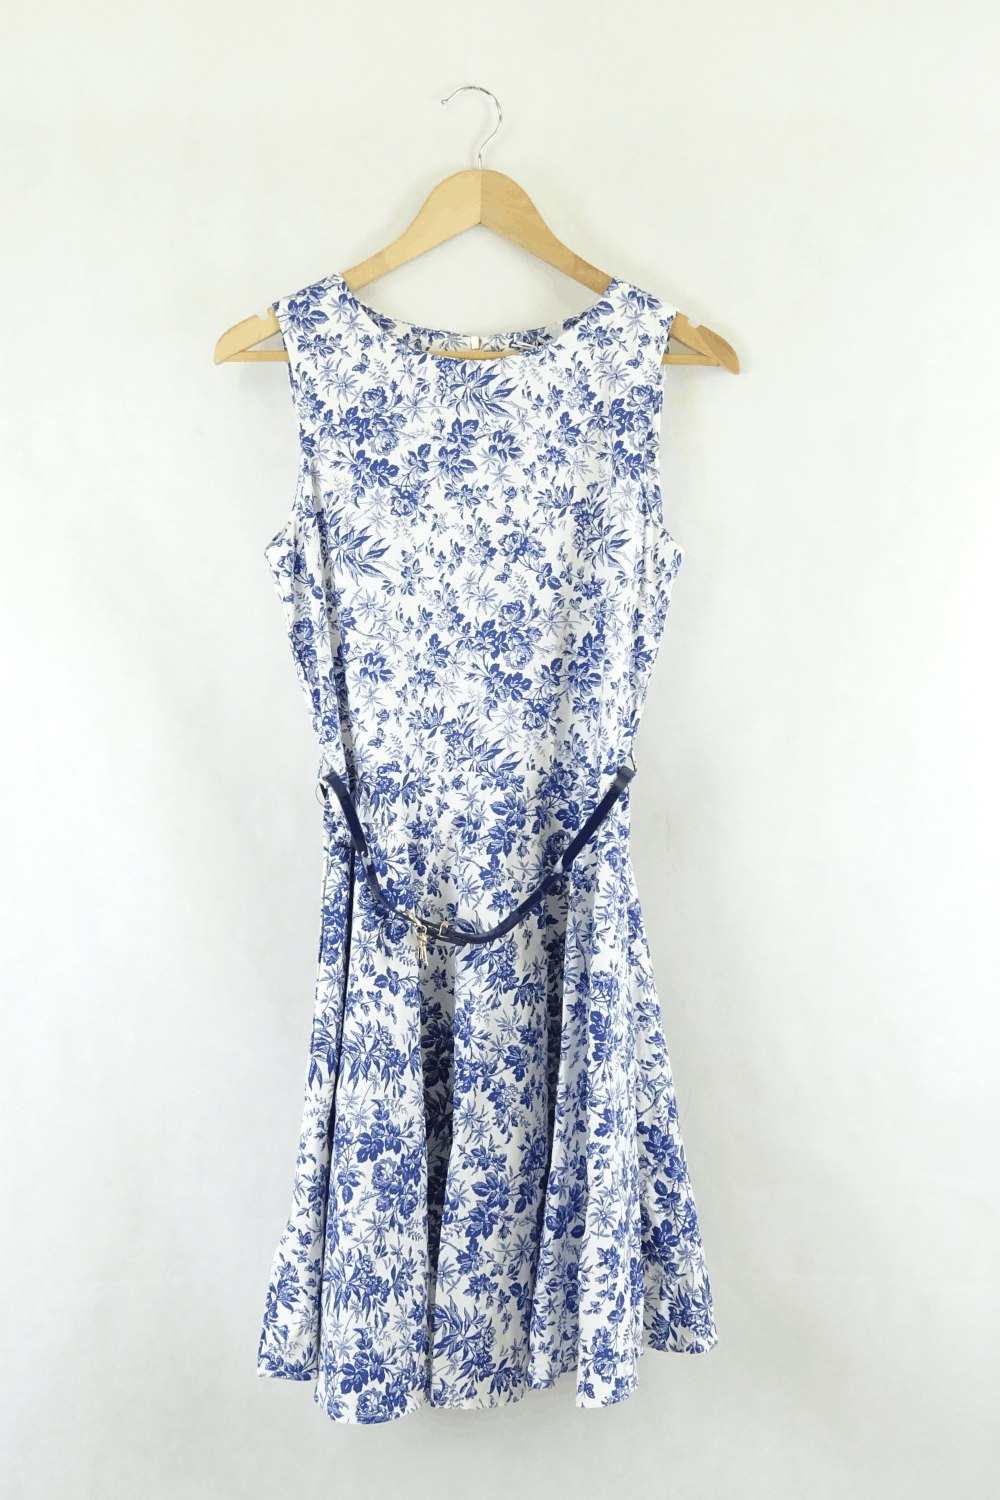 Catalog Blue And White Floral Dress 12